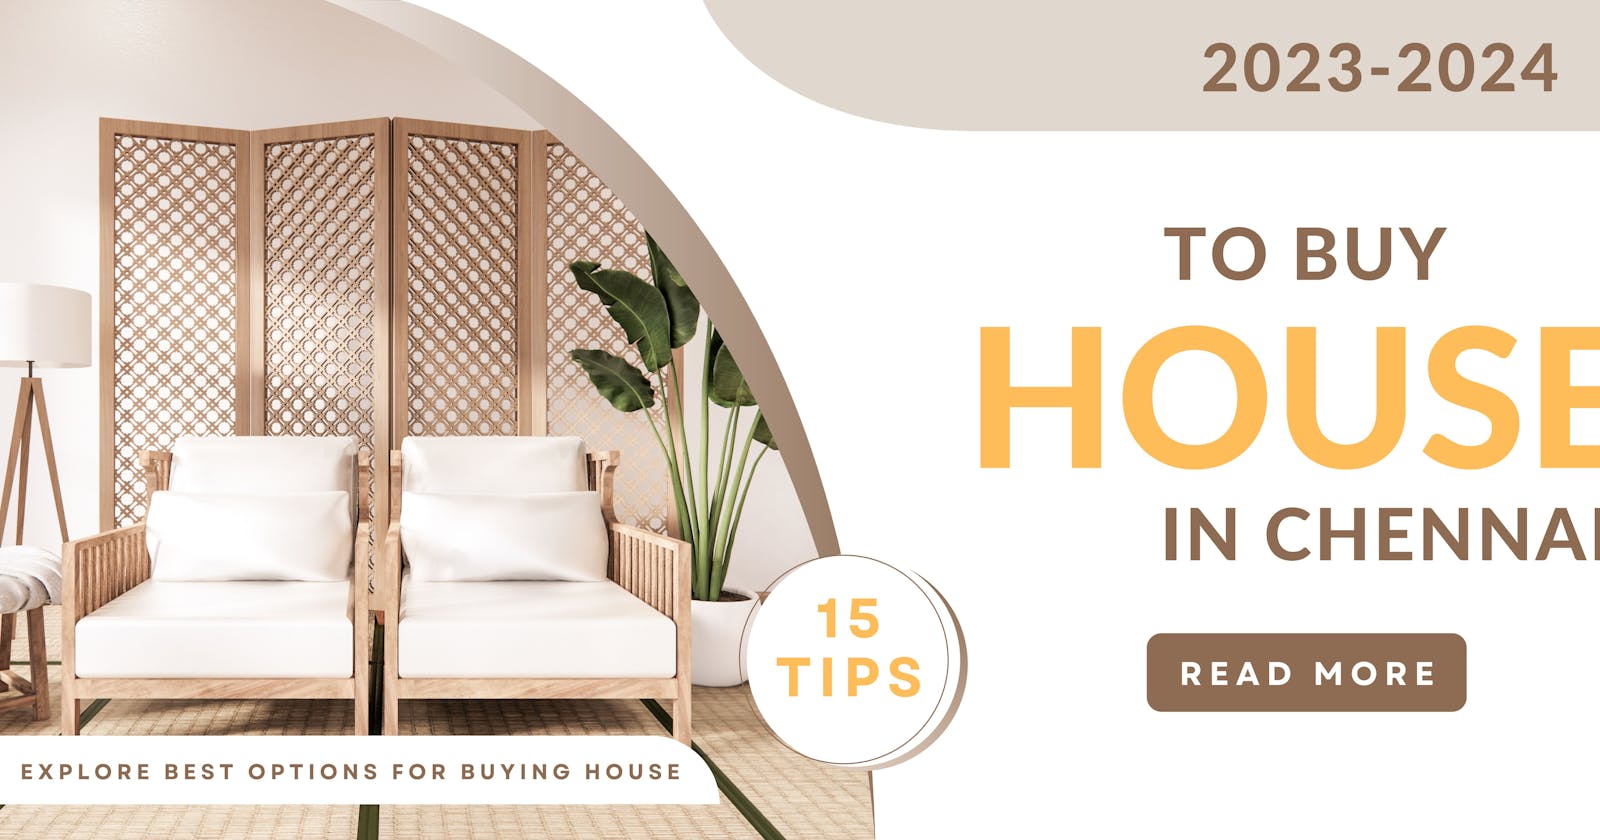 15 Tips on How to Buy House in Chennai for 2023